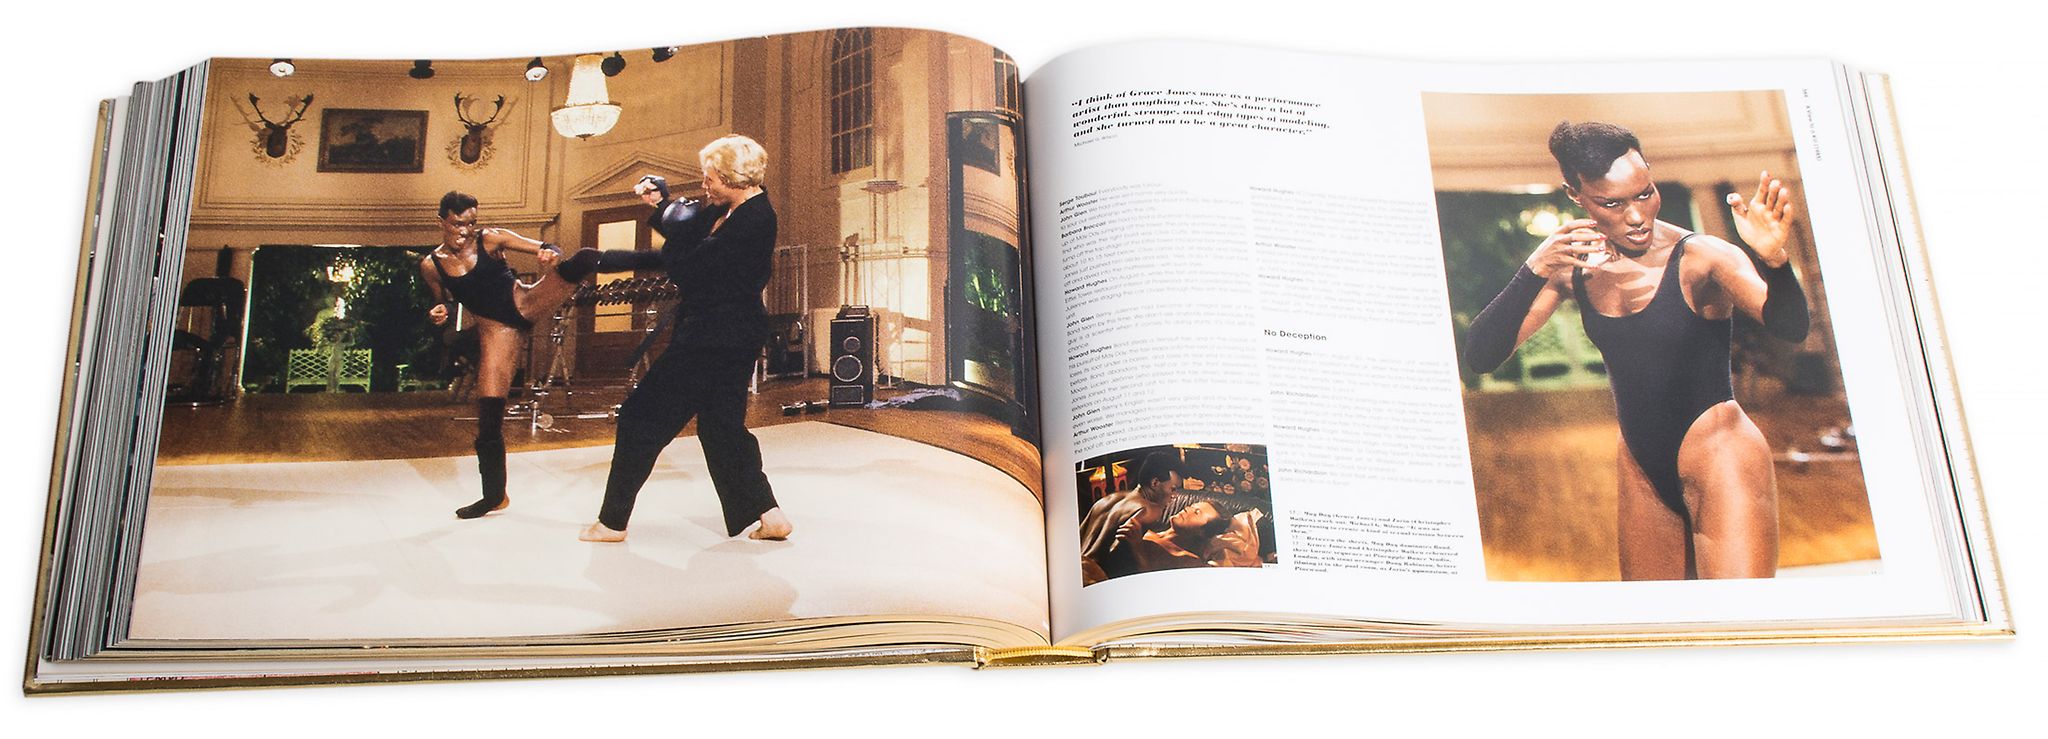 TASCHEN- THE JAMES BOND ARCHIVES - 'The James Bond Archives' edited by Paul Duncan, Golden - Image 7 of 7